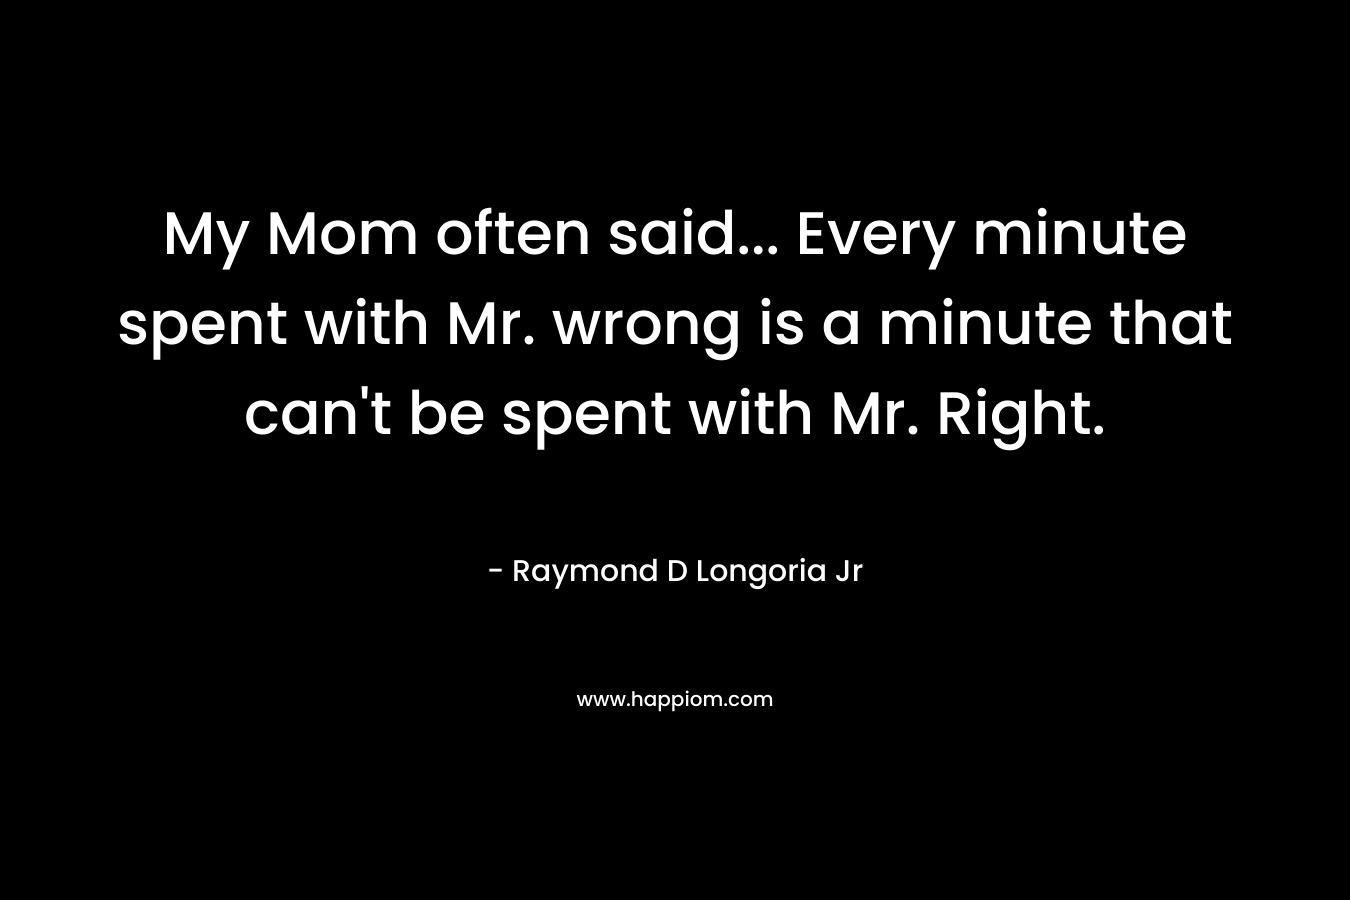 My Mom often said... Every minute spent with Mr. wrong is a minute that can't be spent with Mr. Right.